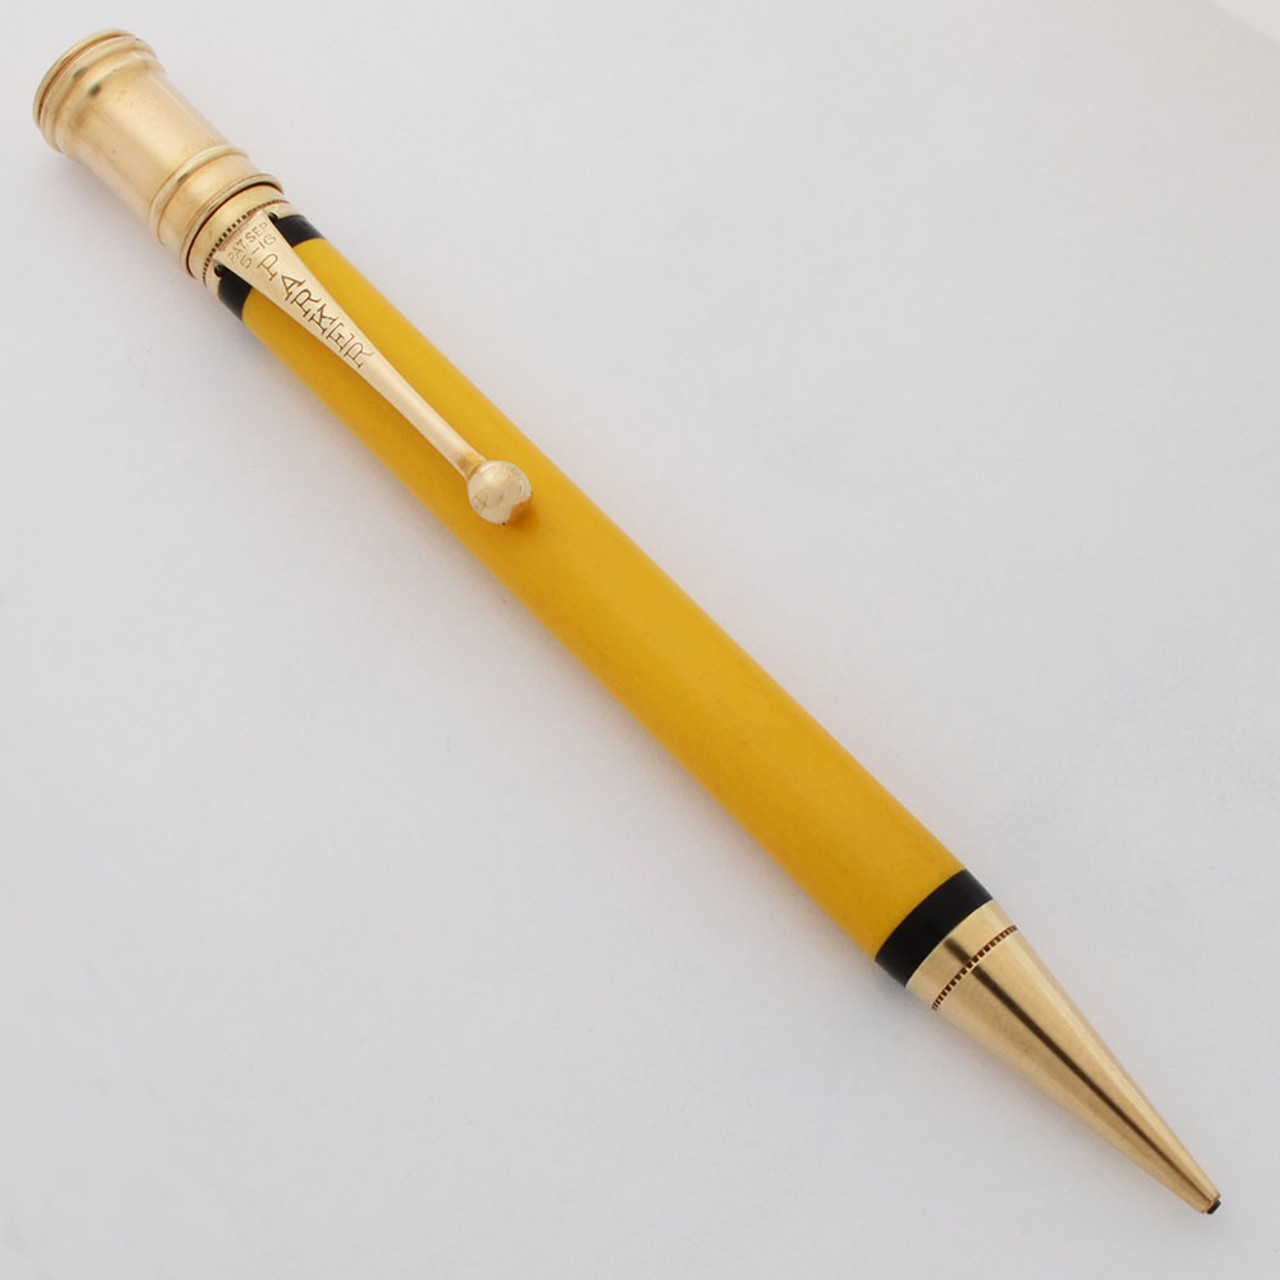 Parker Duofold Junior Mechanical Pencil (1920s) - Mandarin Yellow, Black Bands (Excellent,  Works Well)